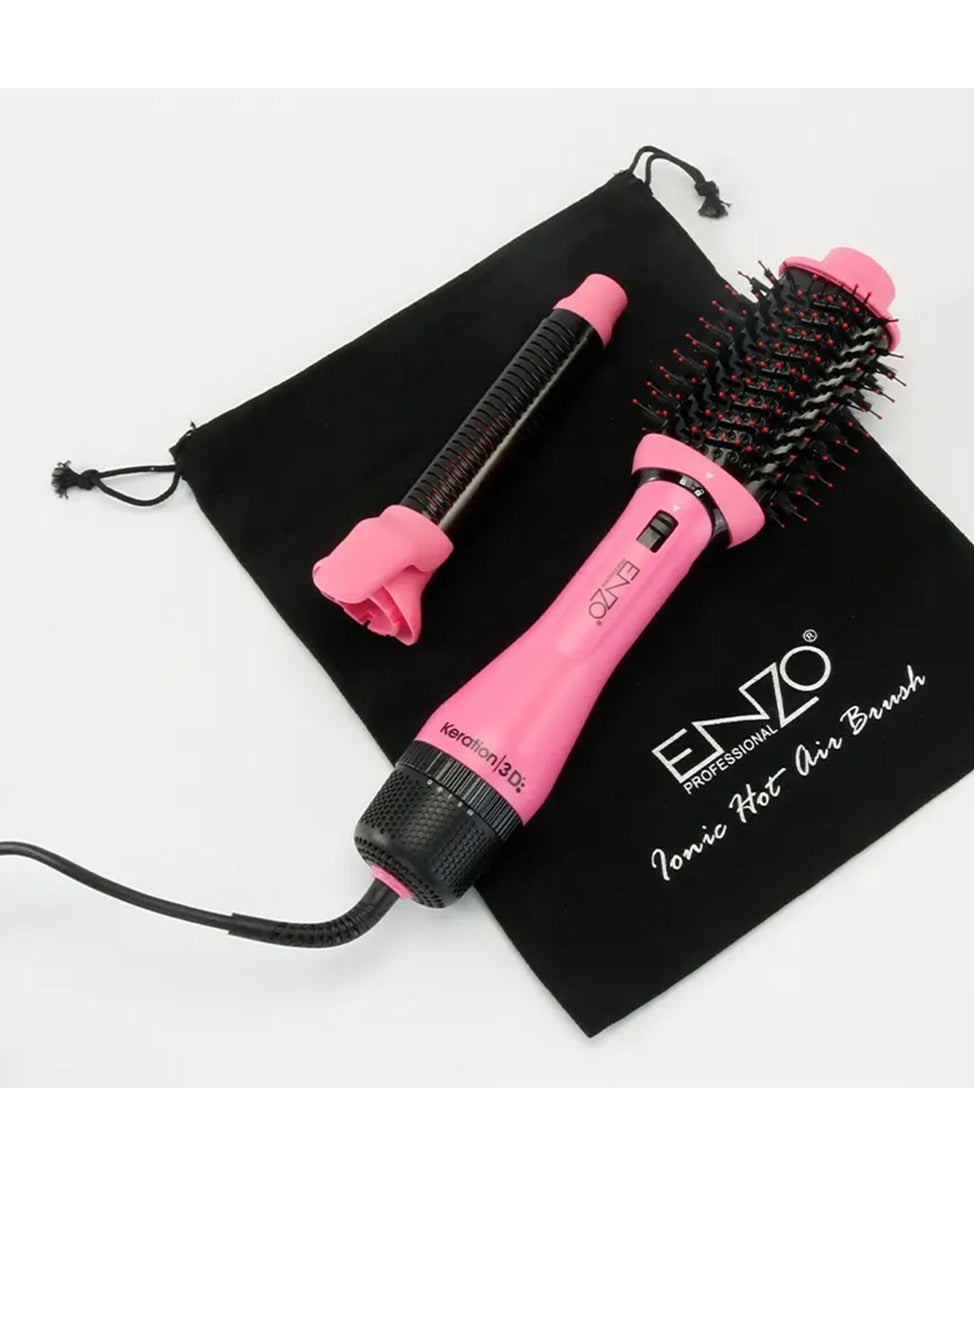 ENZO Professional Ionic High Speed Hair Dryer Hot Air Brush Auto Air Wrap Curler Blow Dryer Comb Ionic 2 in 1 Hair Styler Curler EN-6208